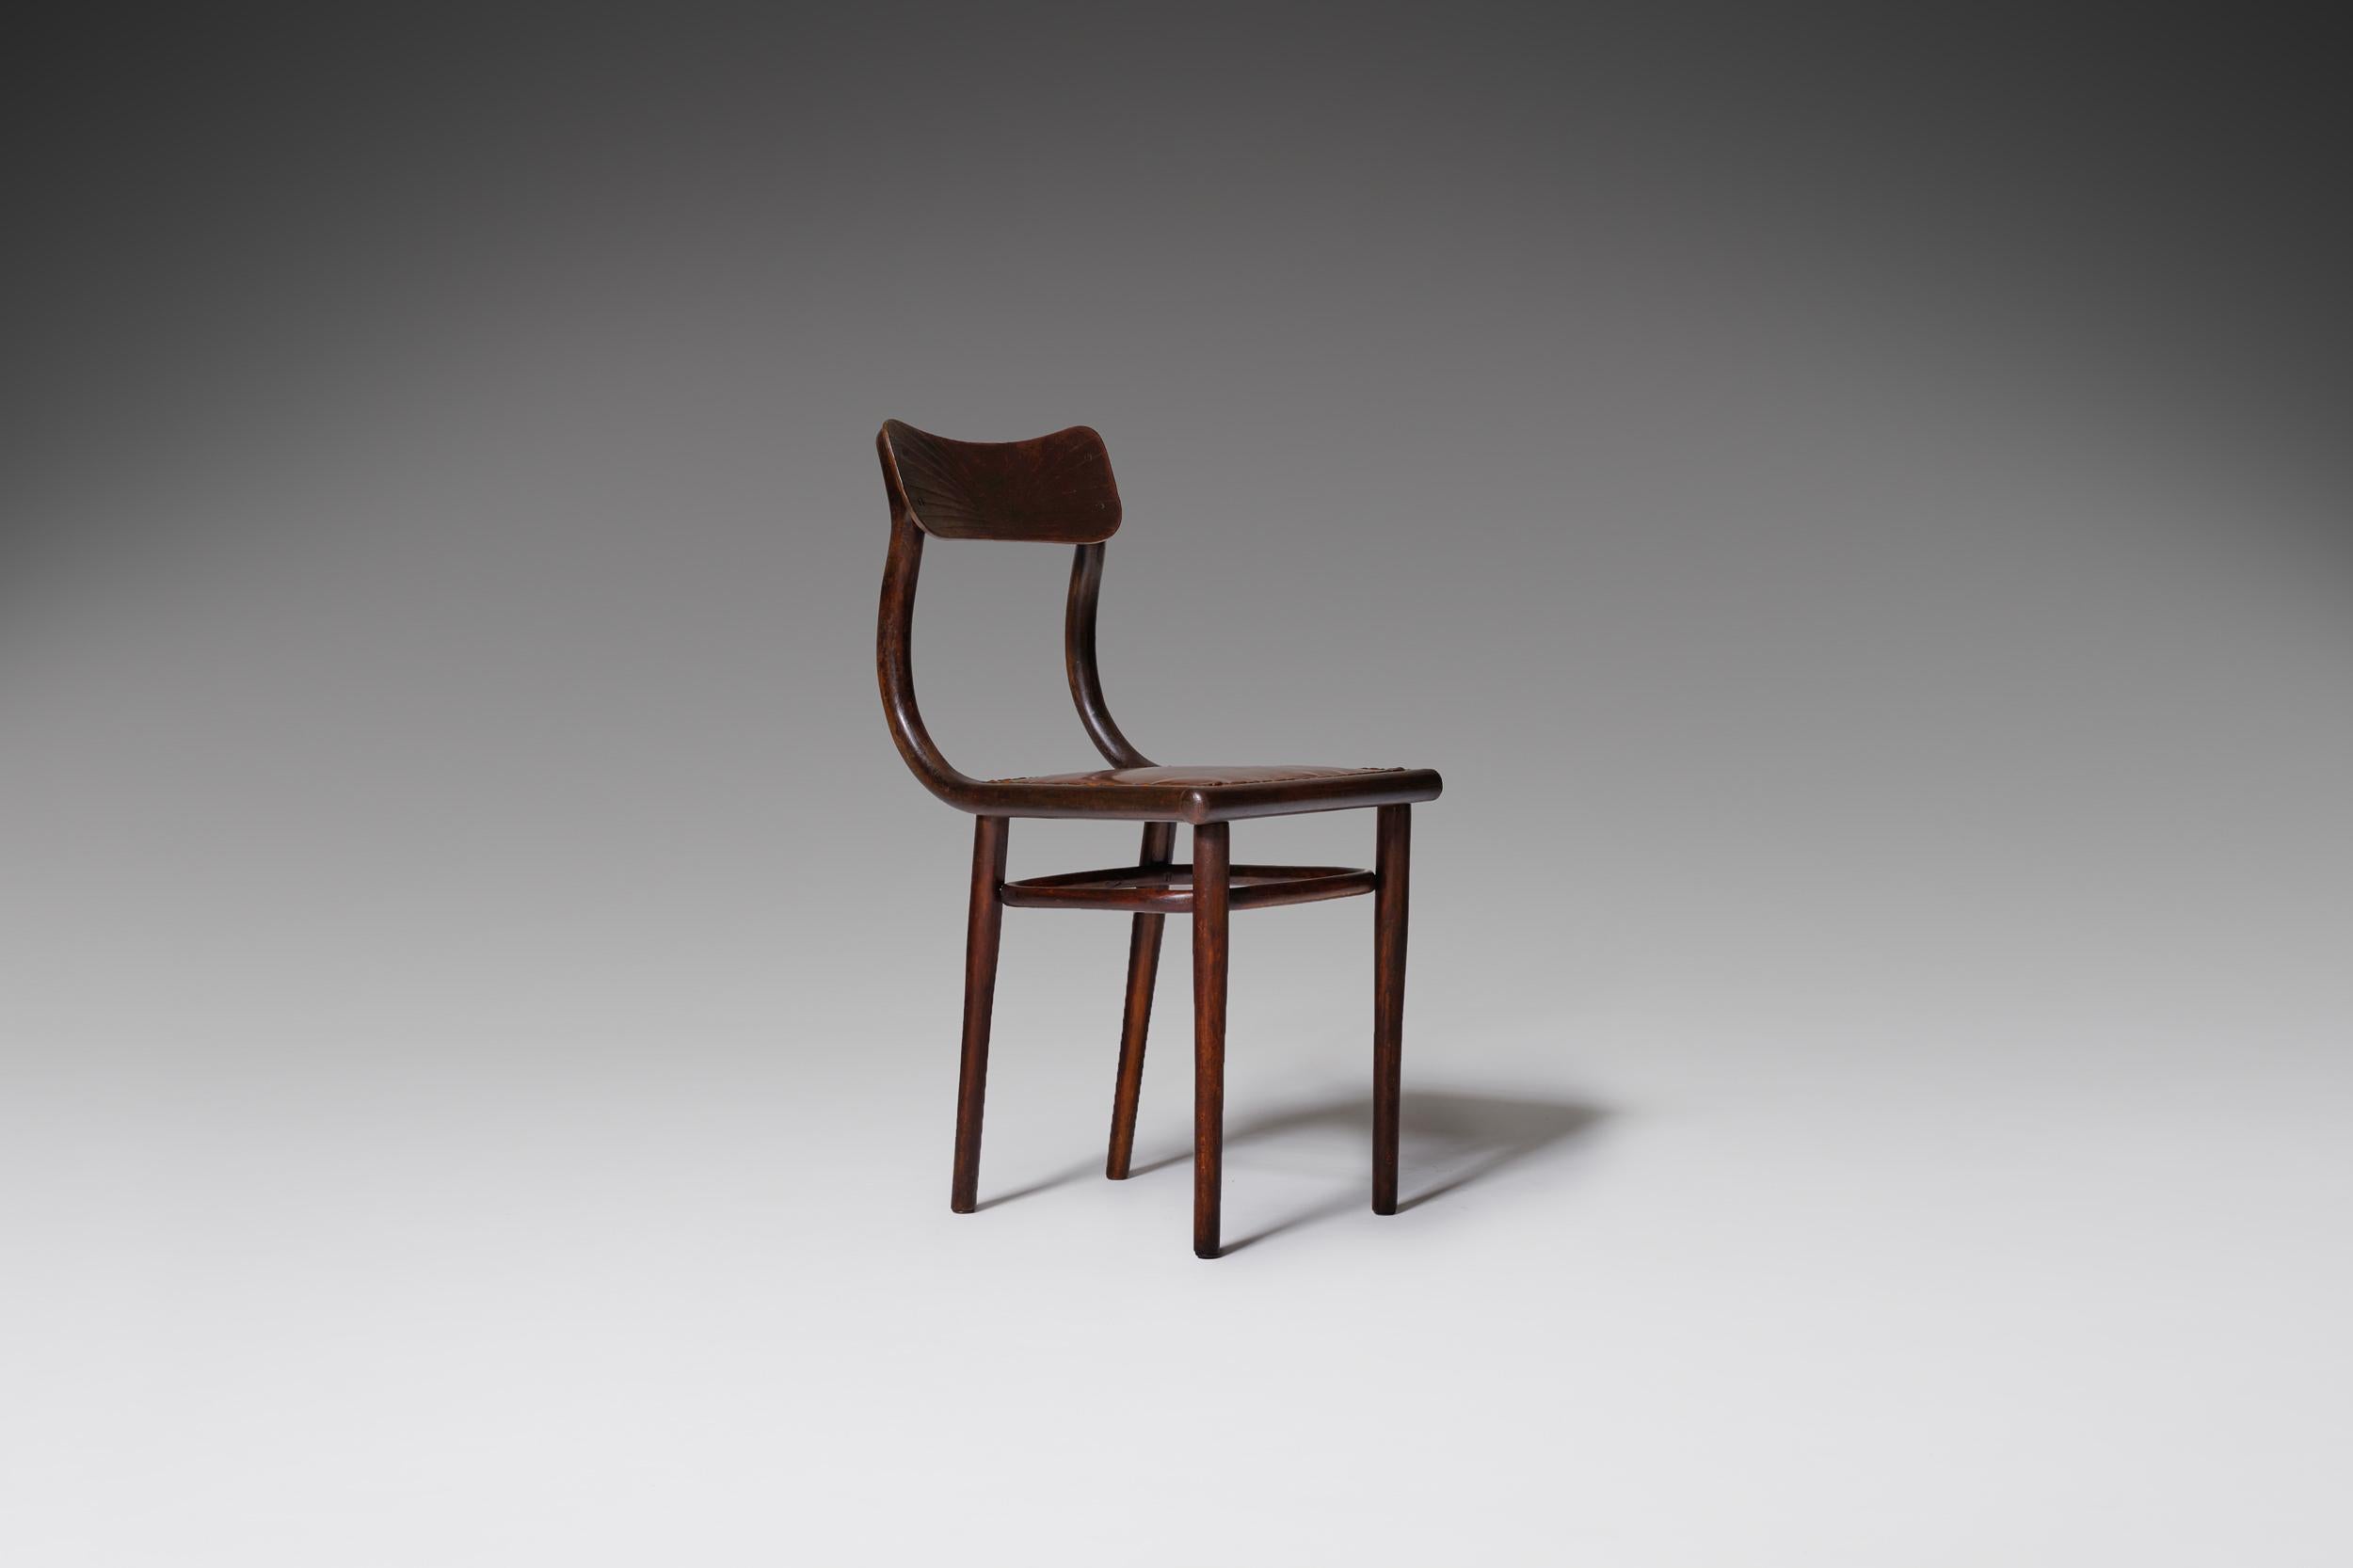 Sculptural Thonet side chair, early model from the beginning of the 1900s. The chair has a beautiful bent wooden frame with a nicely patinated cognac leather seat which is finish with authentic brass nails. The bended wooden frame holds an elegant